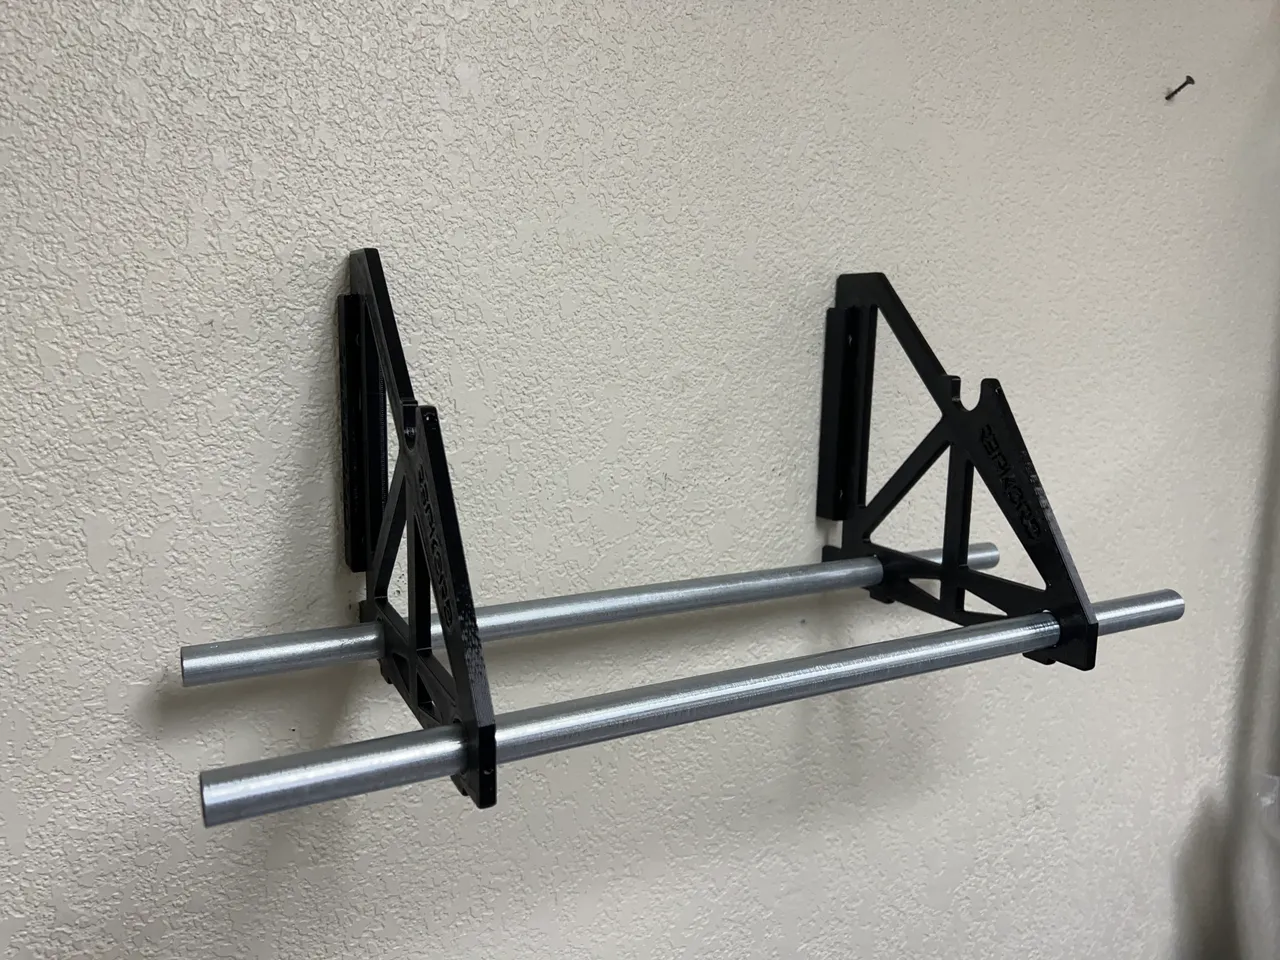 Gravity Feed Spool Rack Is Base Deck Mount – Fixtures Close Up